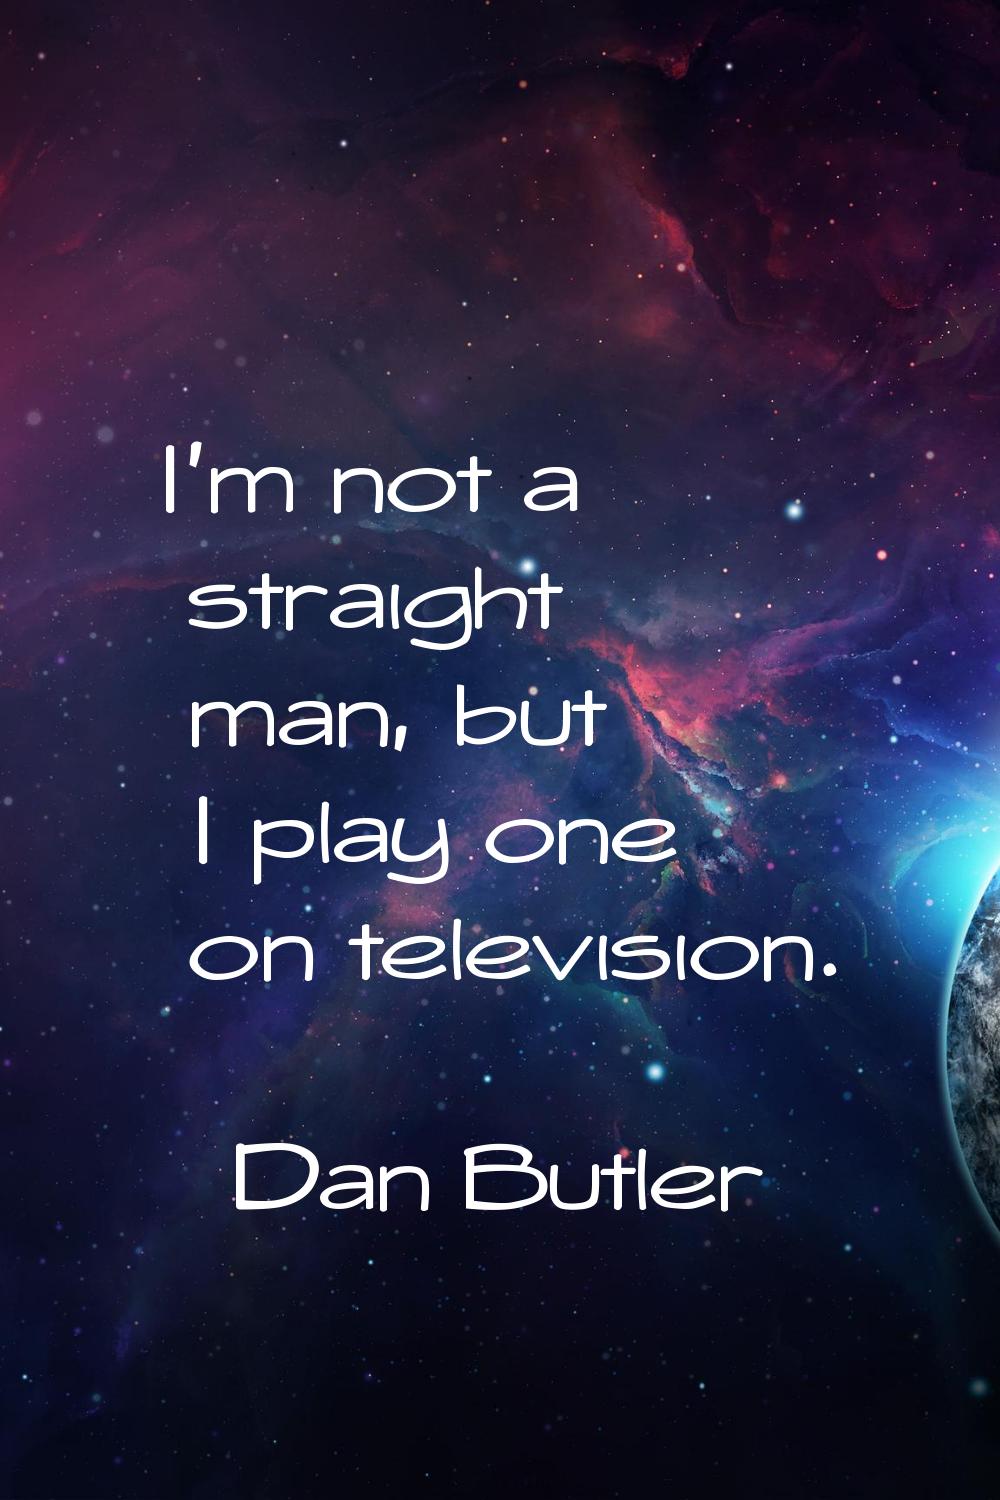 I'm not a straight man, but I play one on television.